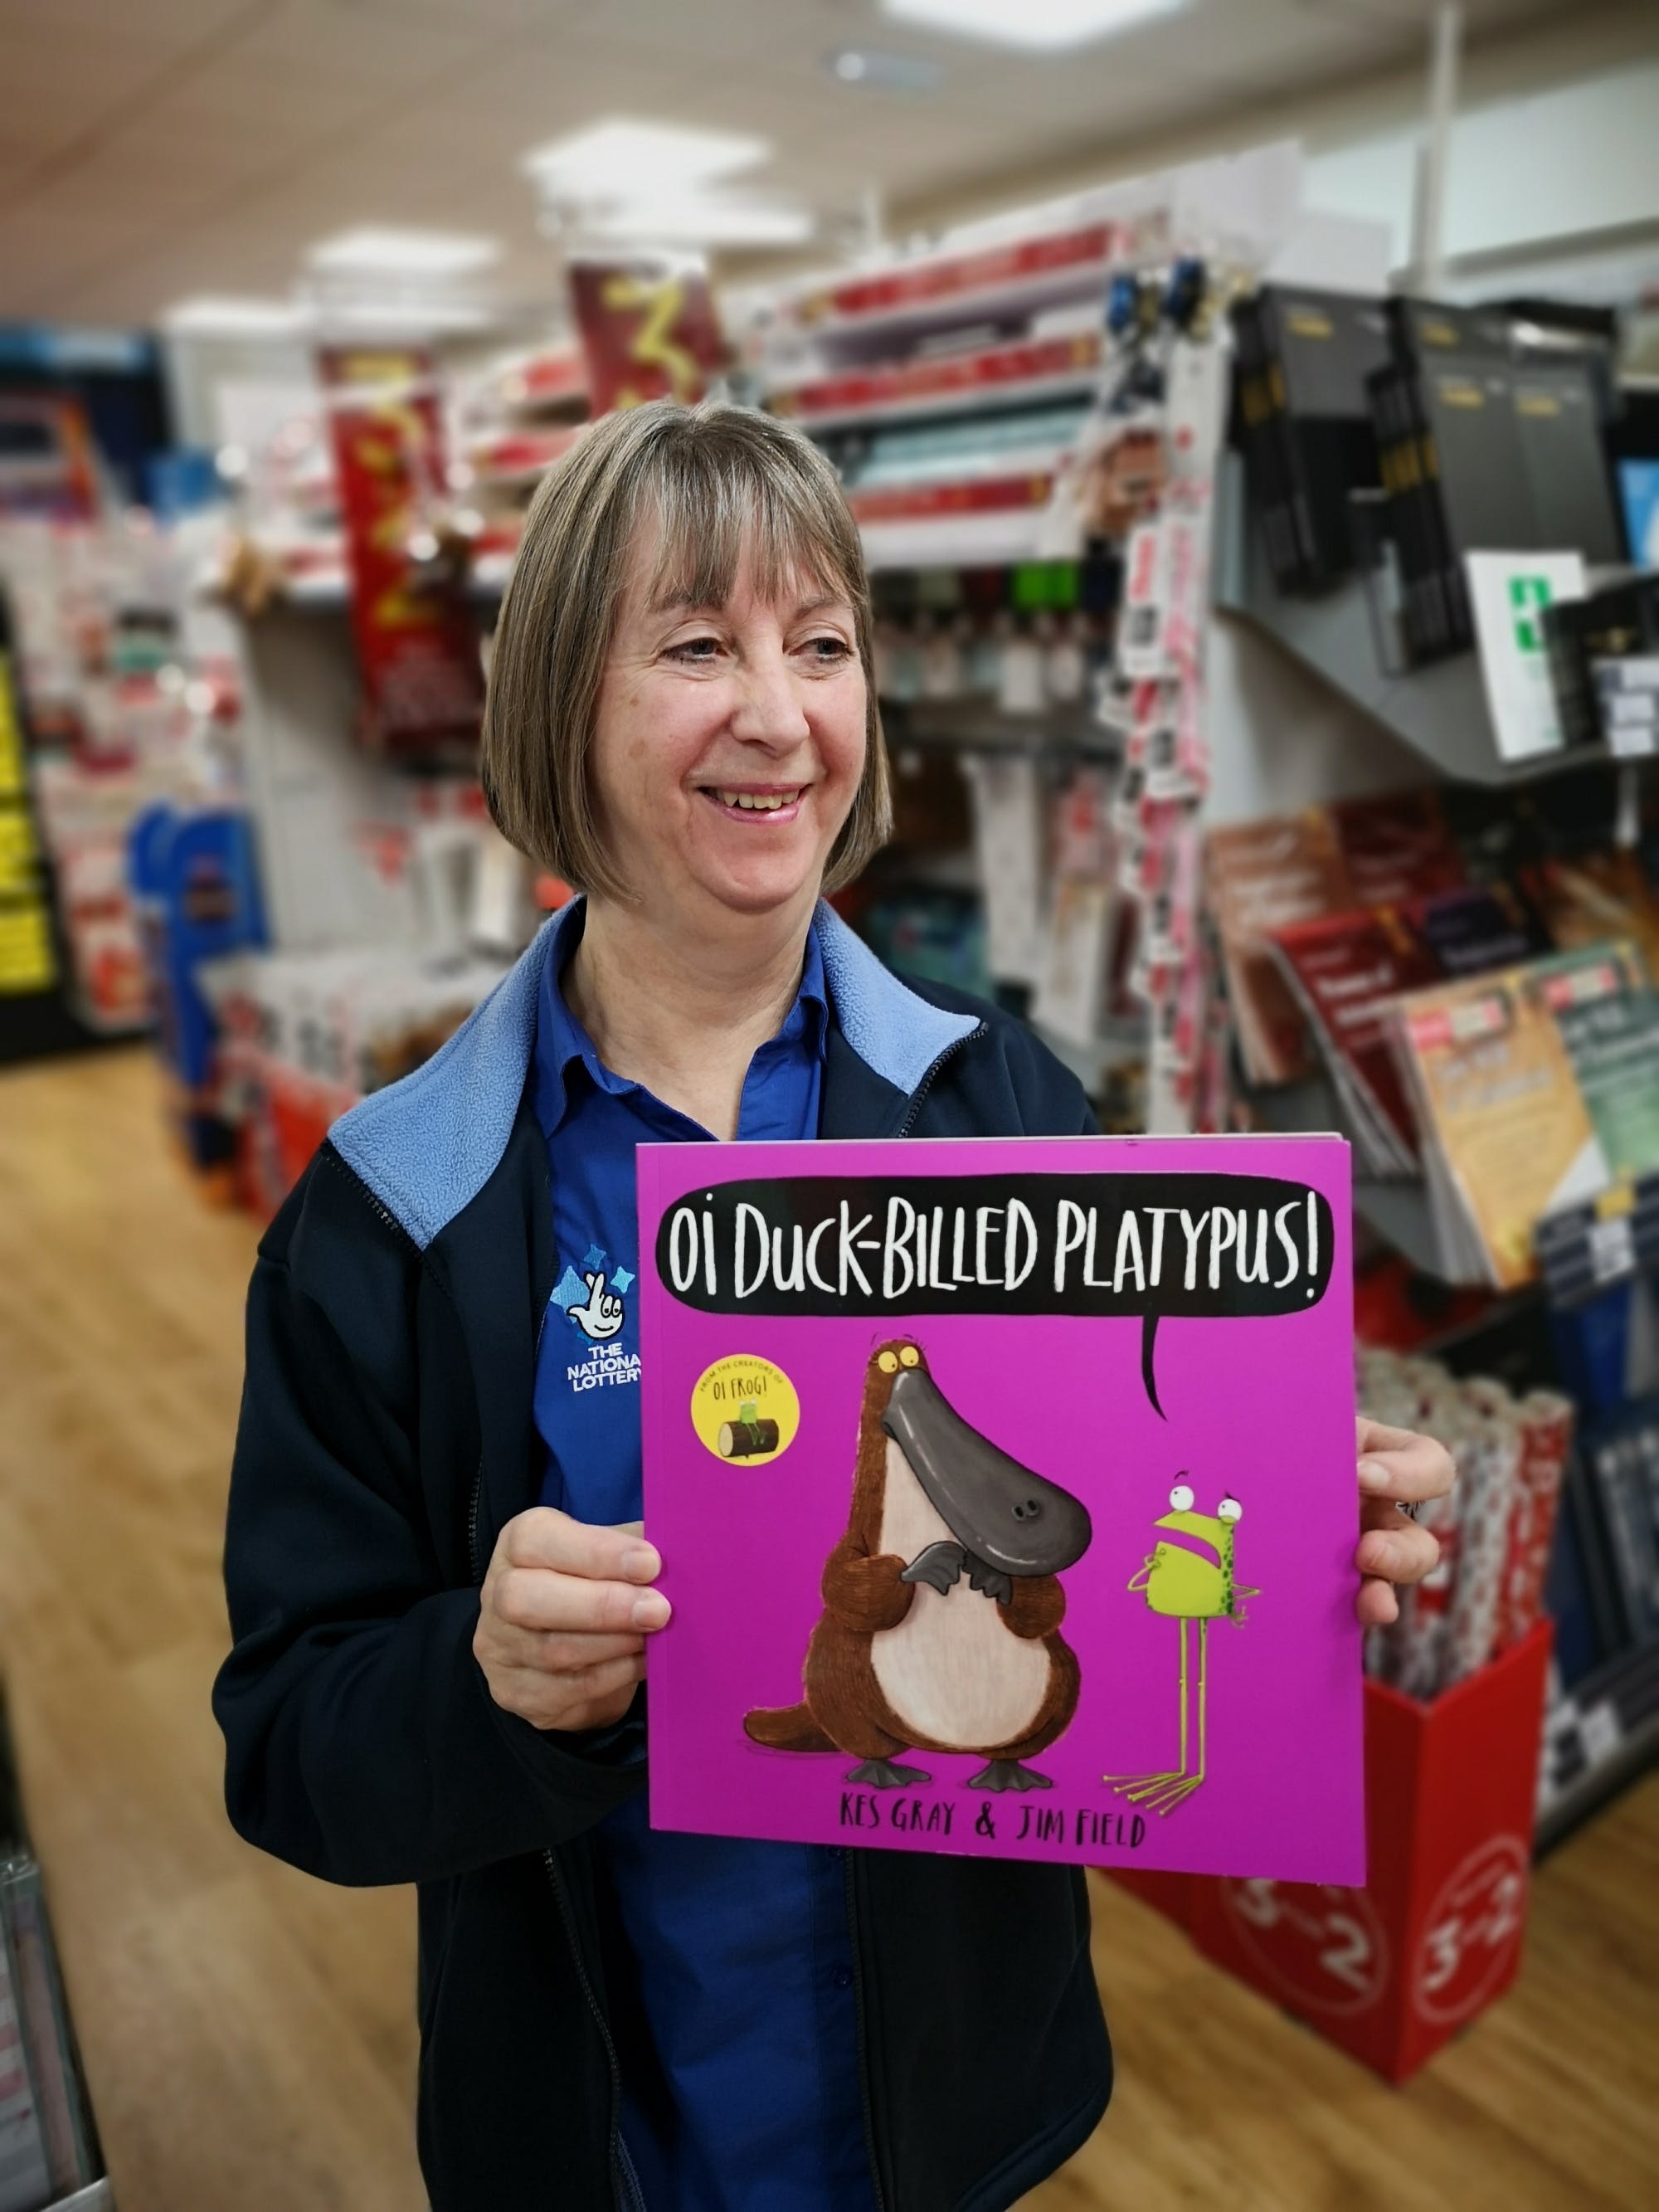 WH Smith Oi Frog sequel alert for kids. It's Oi Duck-Billed Platypus of course! £6.99